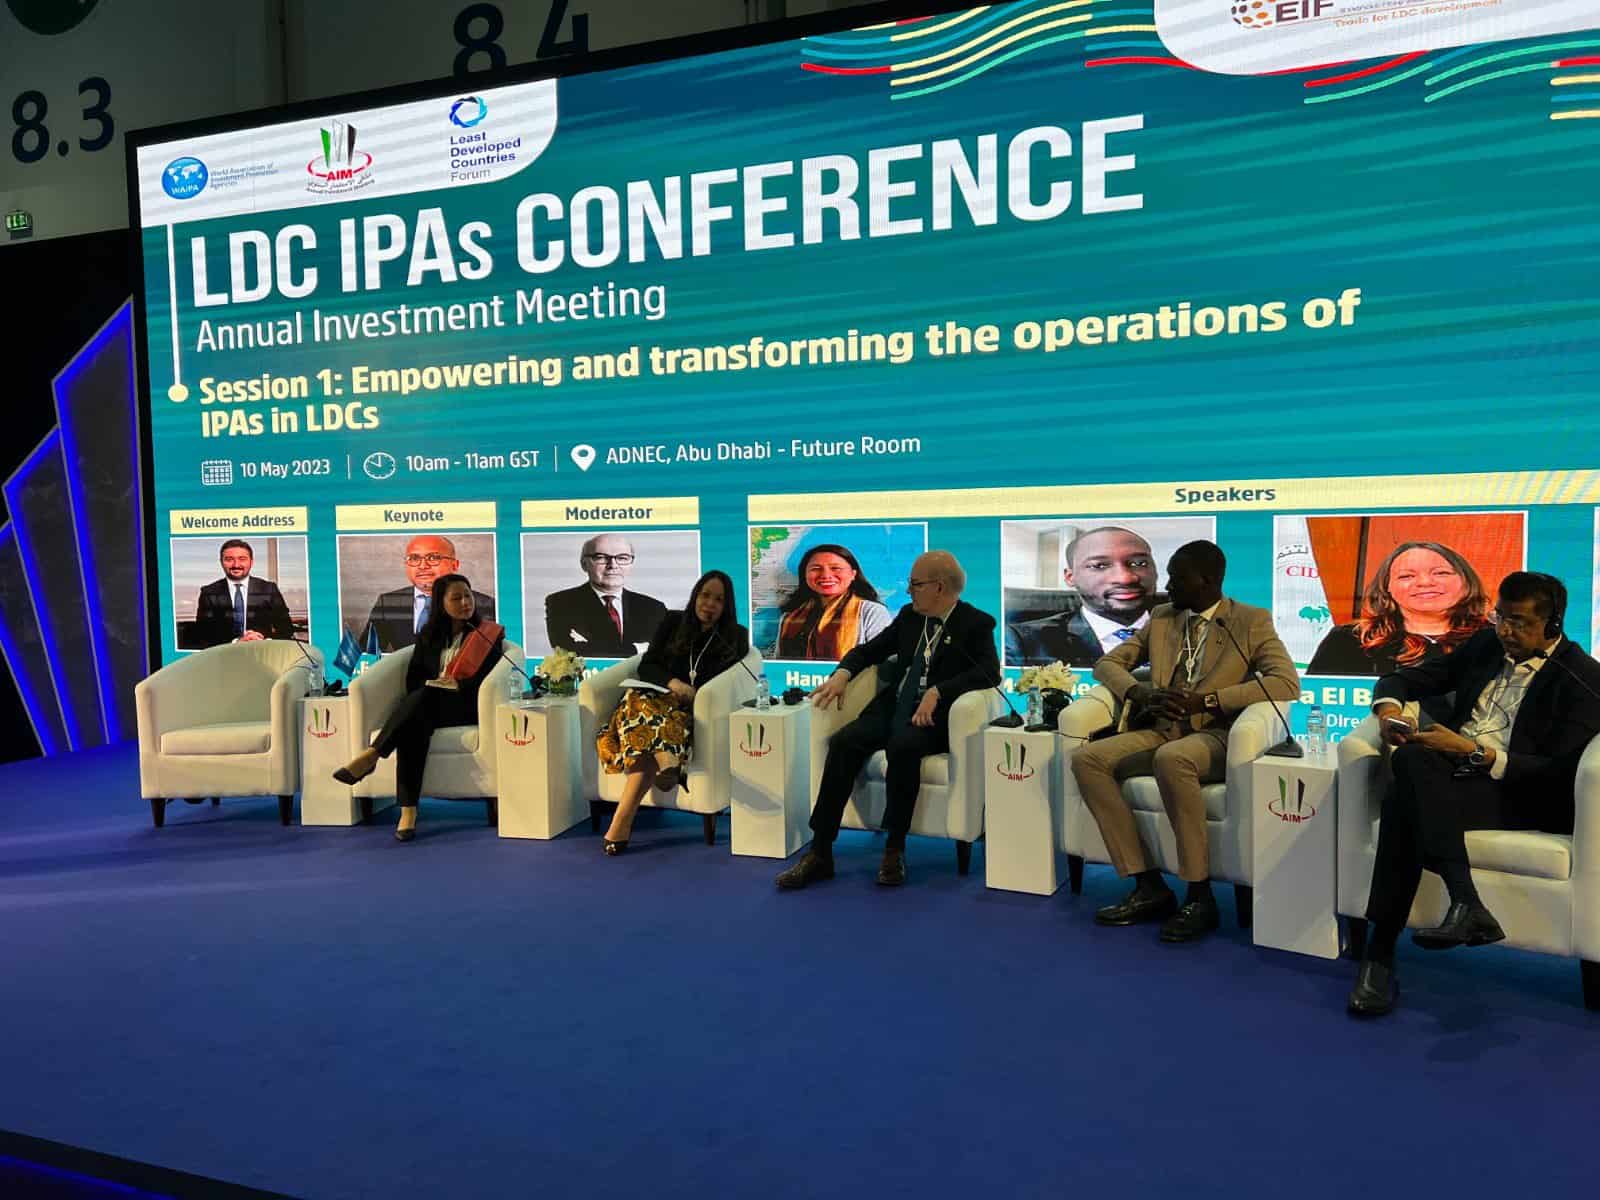 LDC IPAs Conference”Empowering and transforming the operations of IPAs